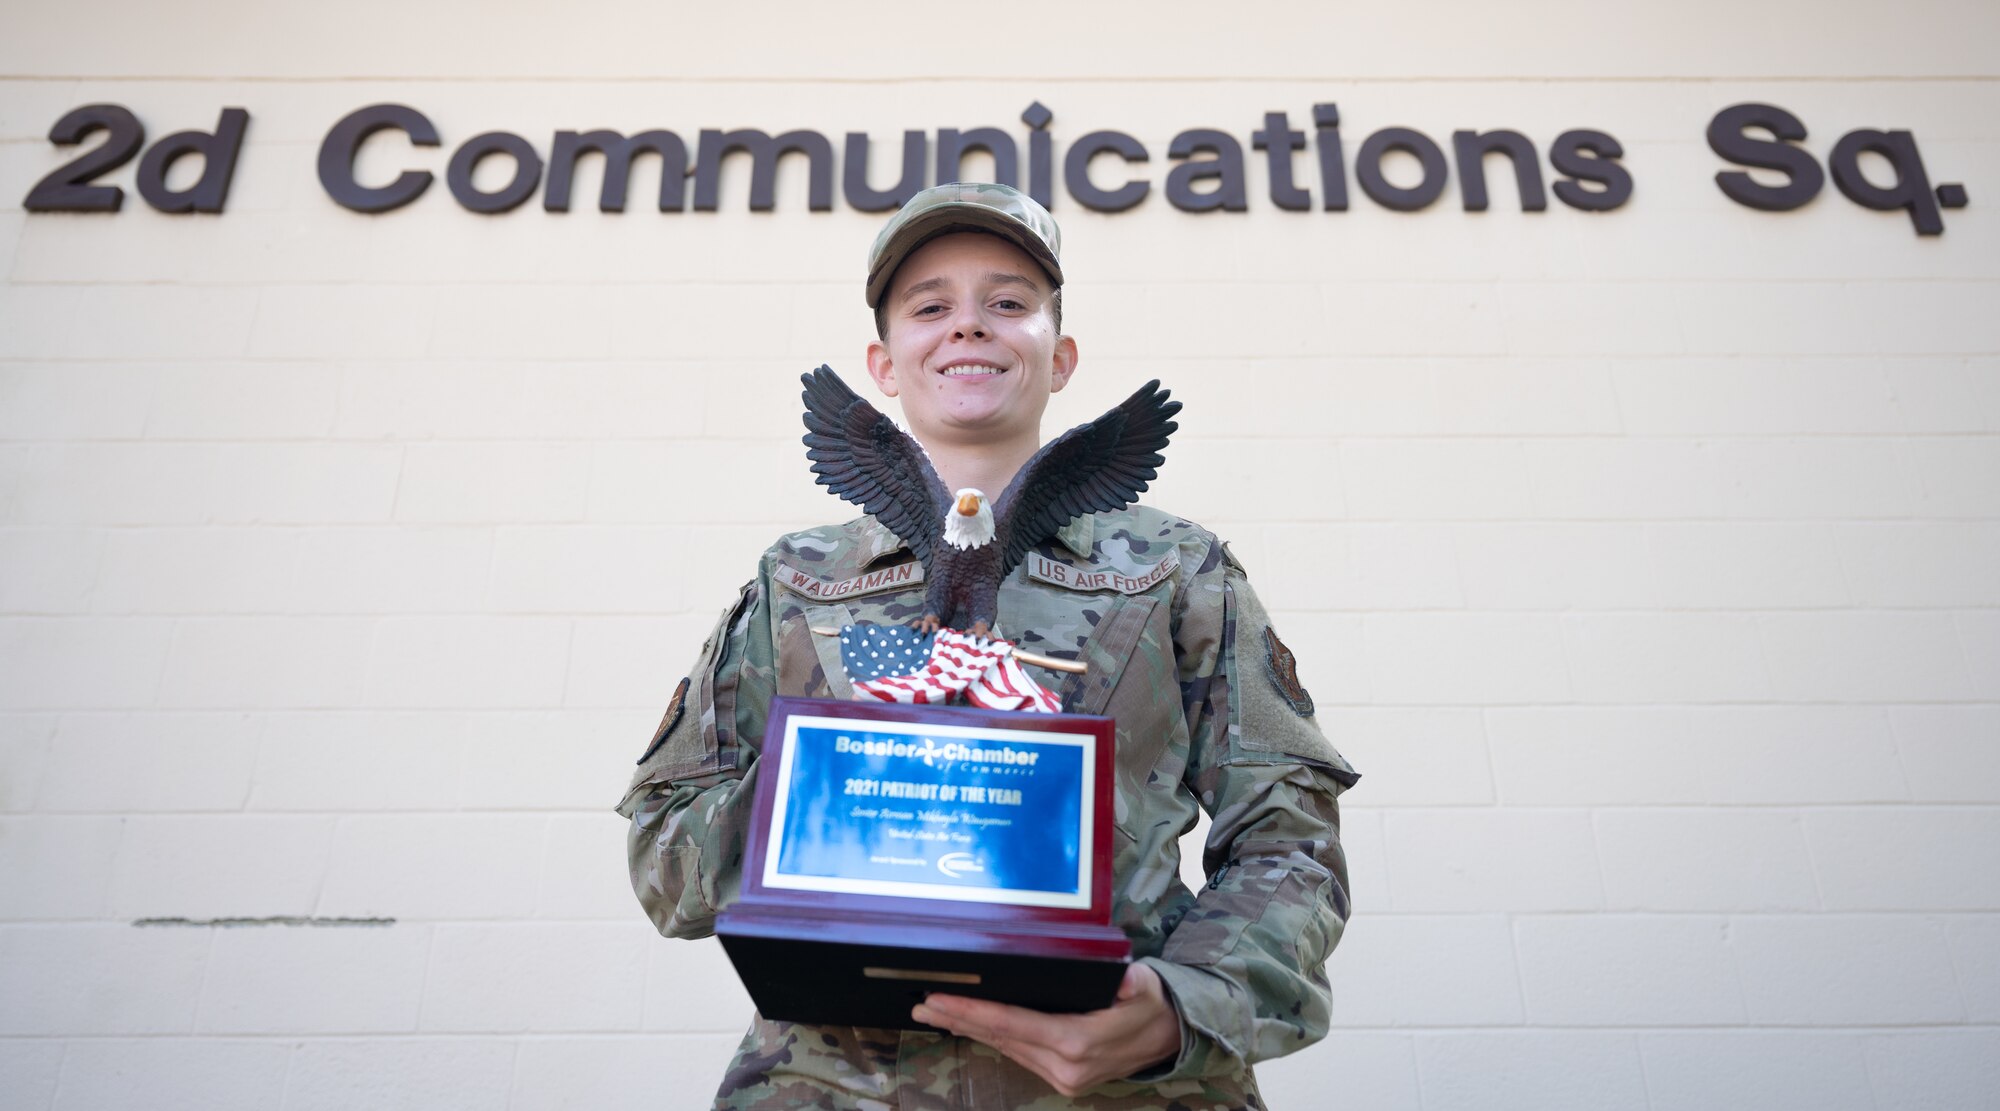 Waugaman was put up for the Patriot Award for her life-saving efforts on a Bomber Task Force deployment at the beginning of 2021 where she saved the life of a drowning snorkeler